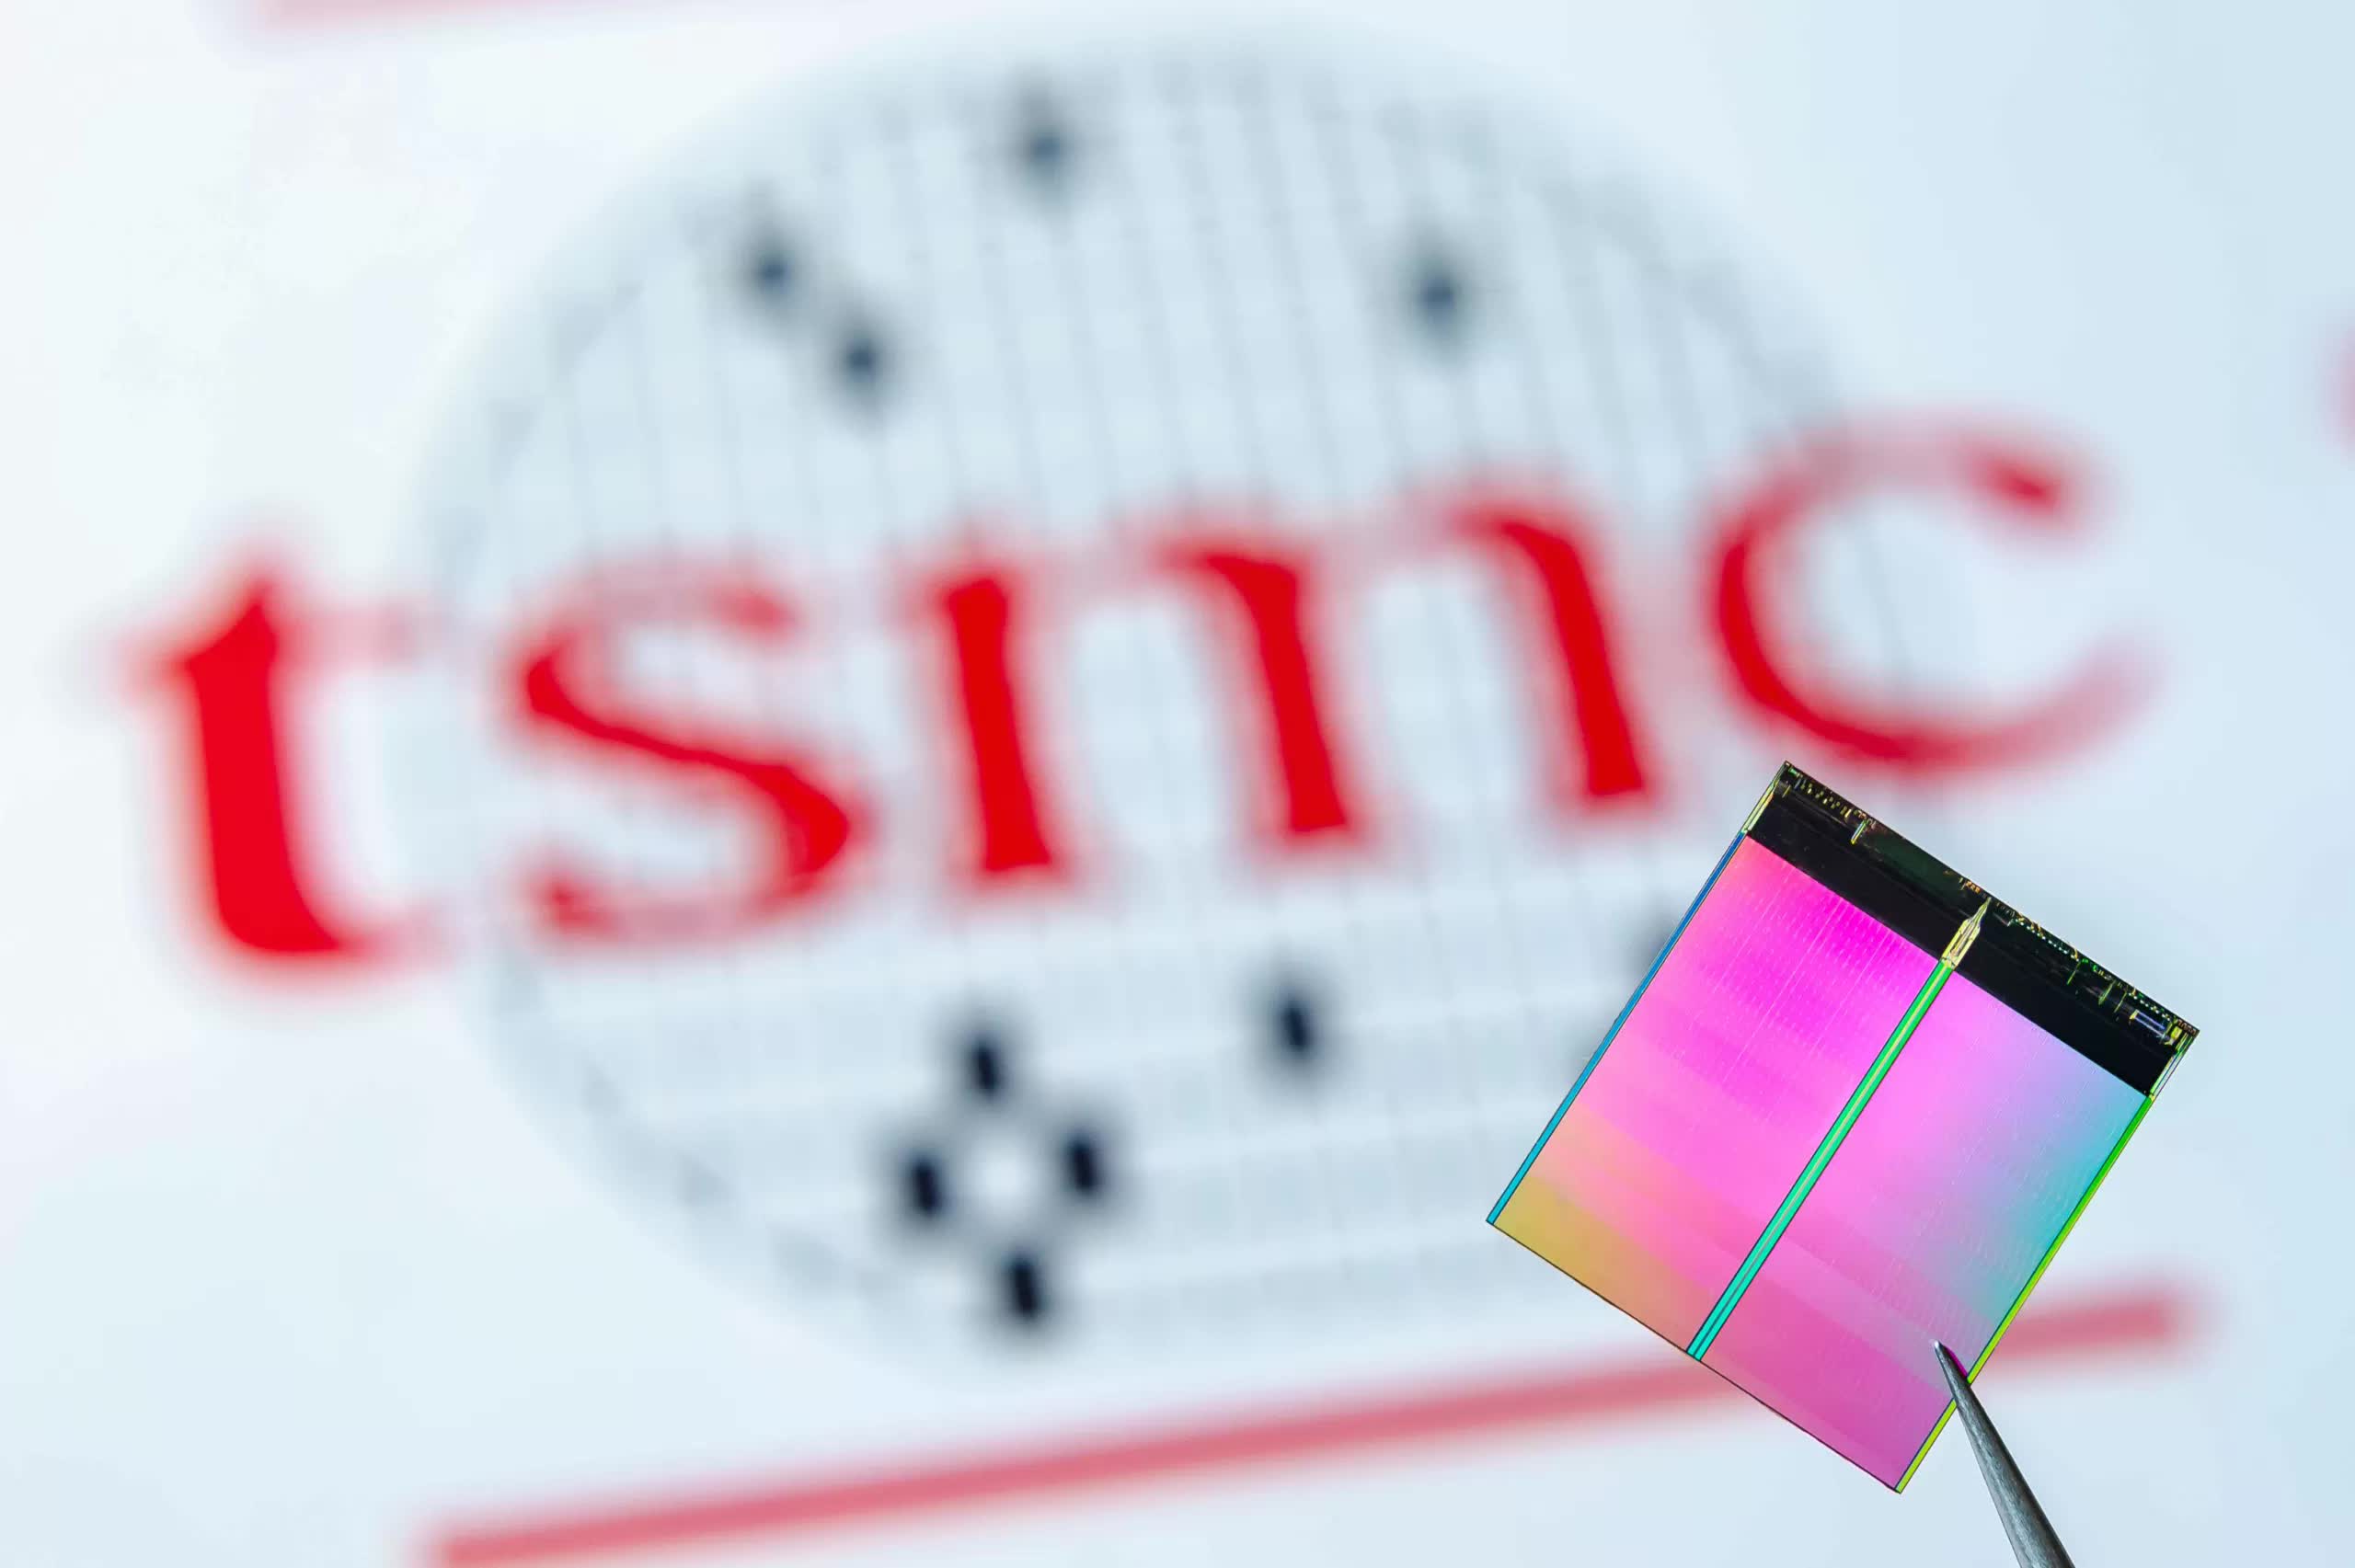 TMSC is ending discounts and increasing wafer prices